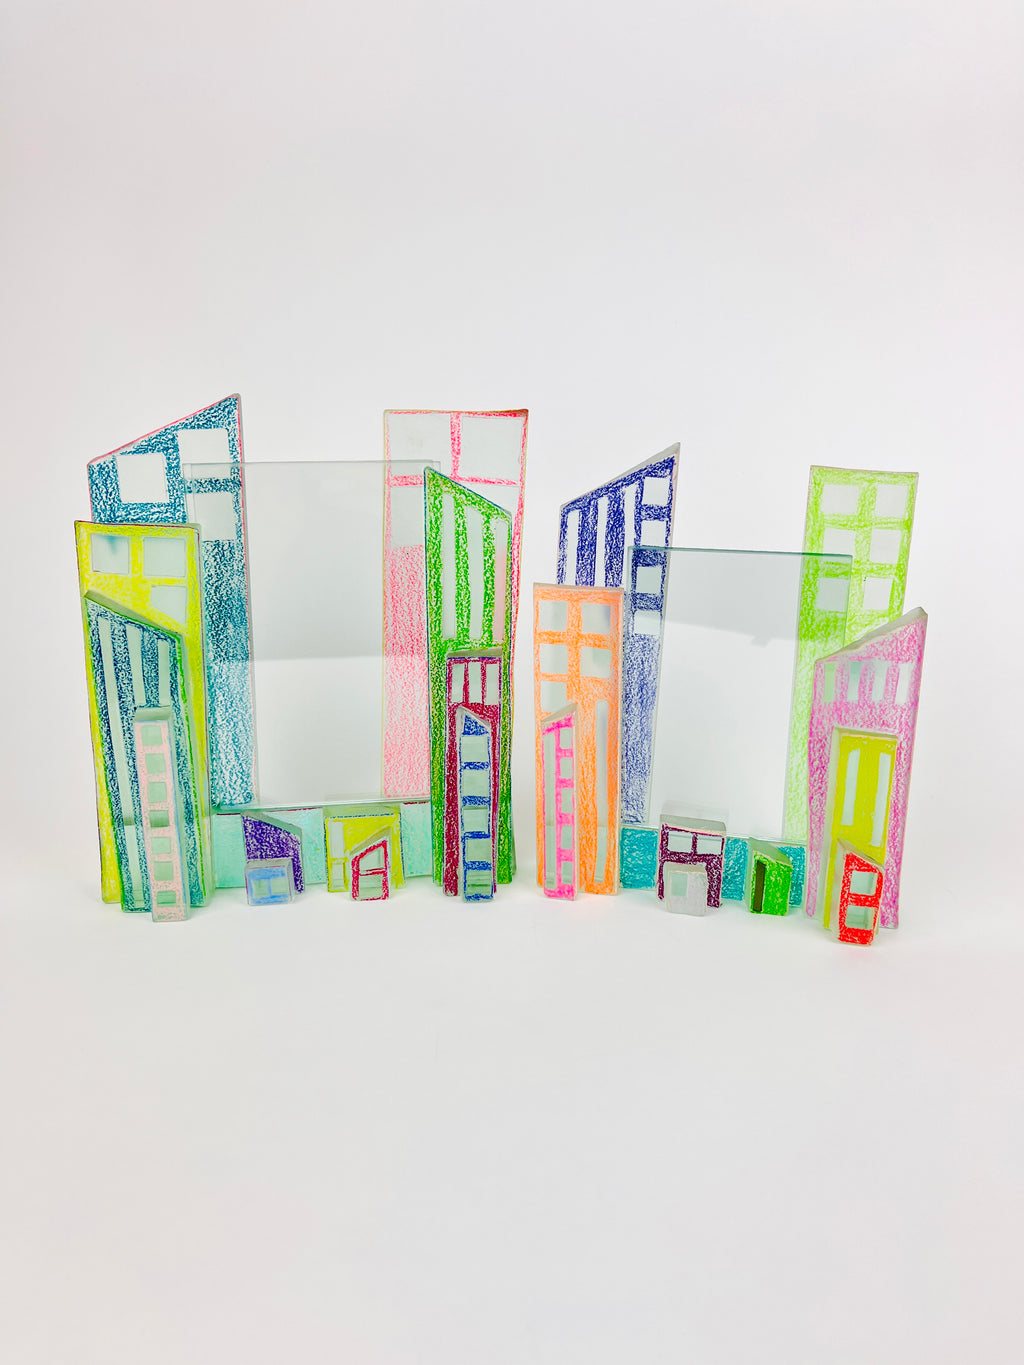 Postmodern Art Glass Cityscape Picture Frames - a Pair